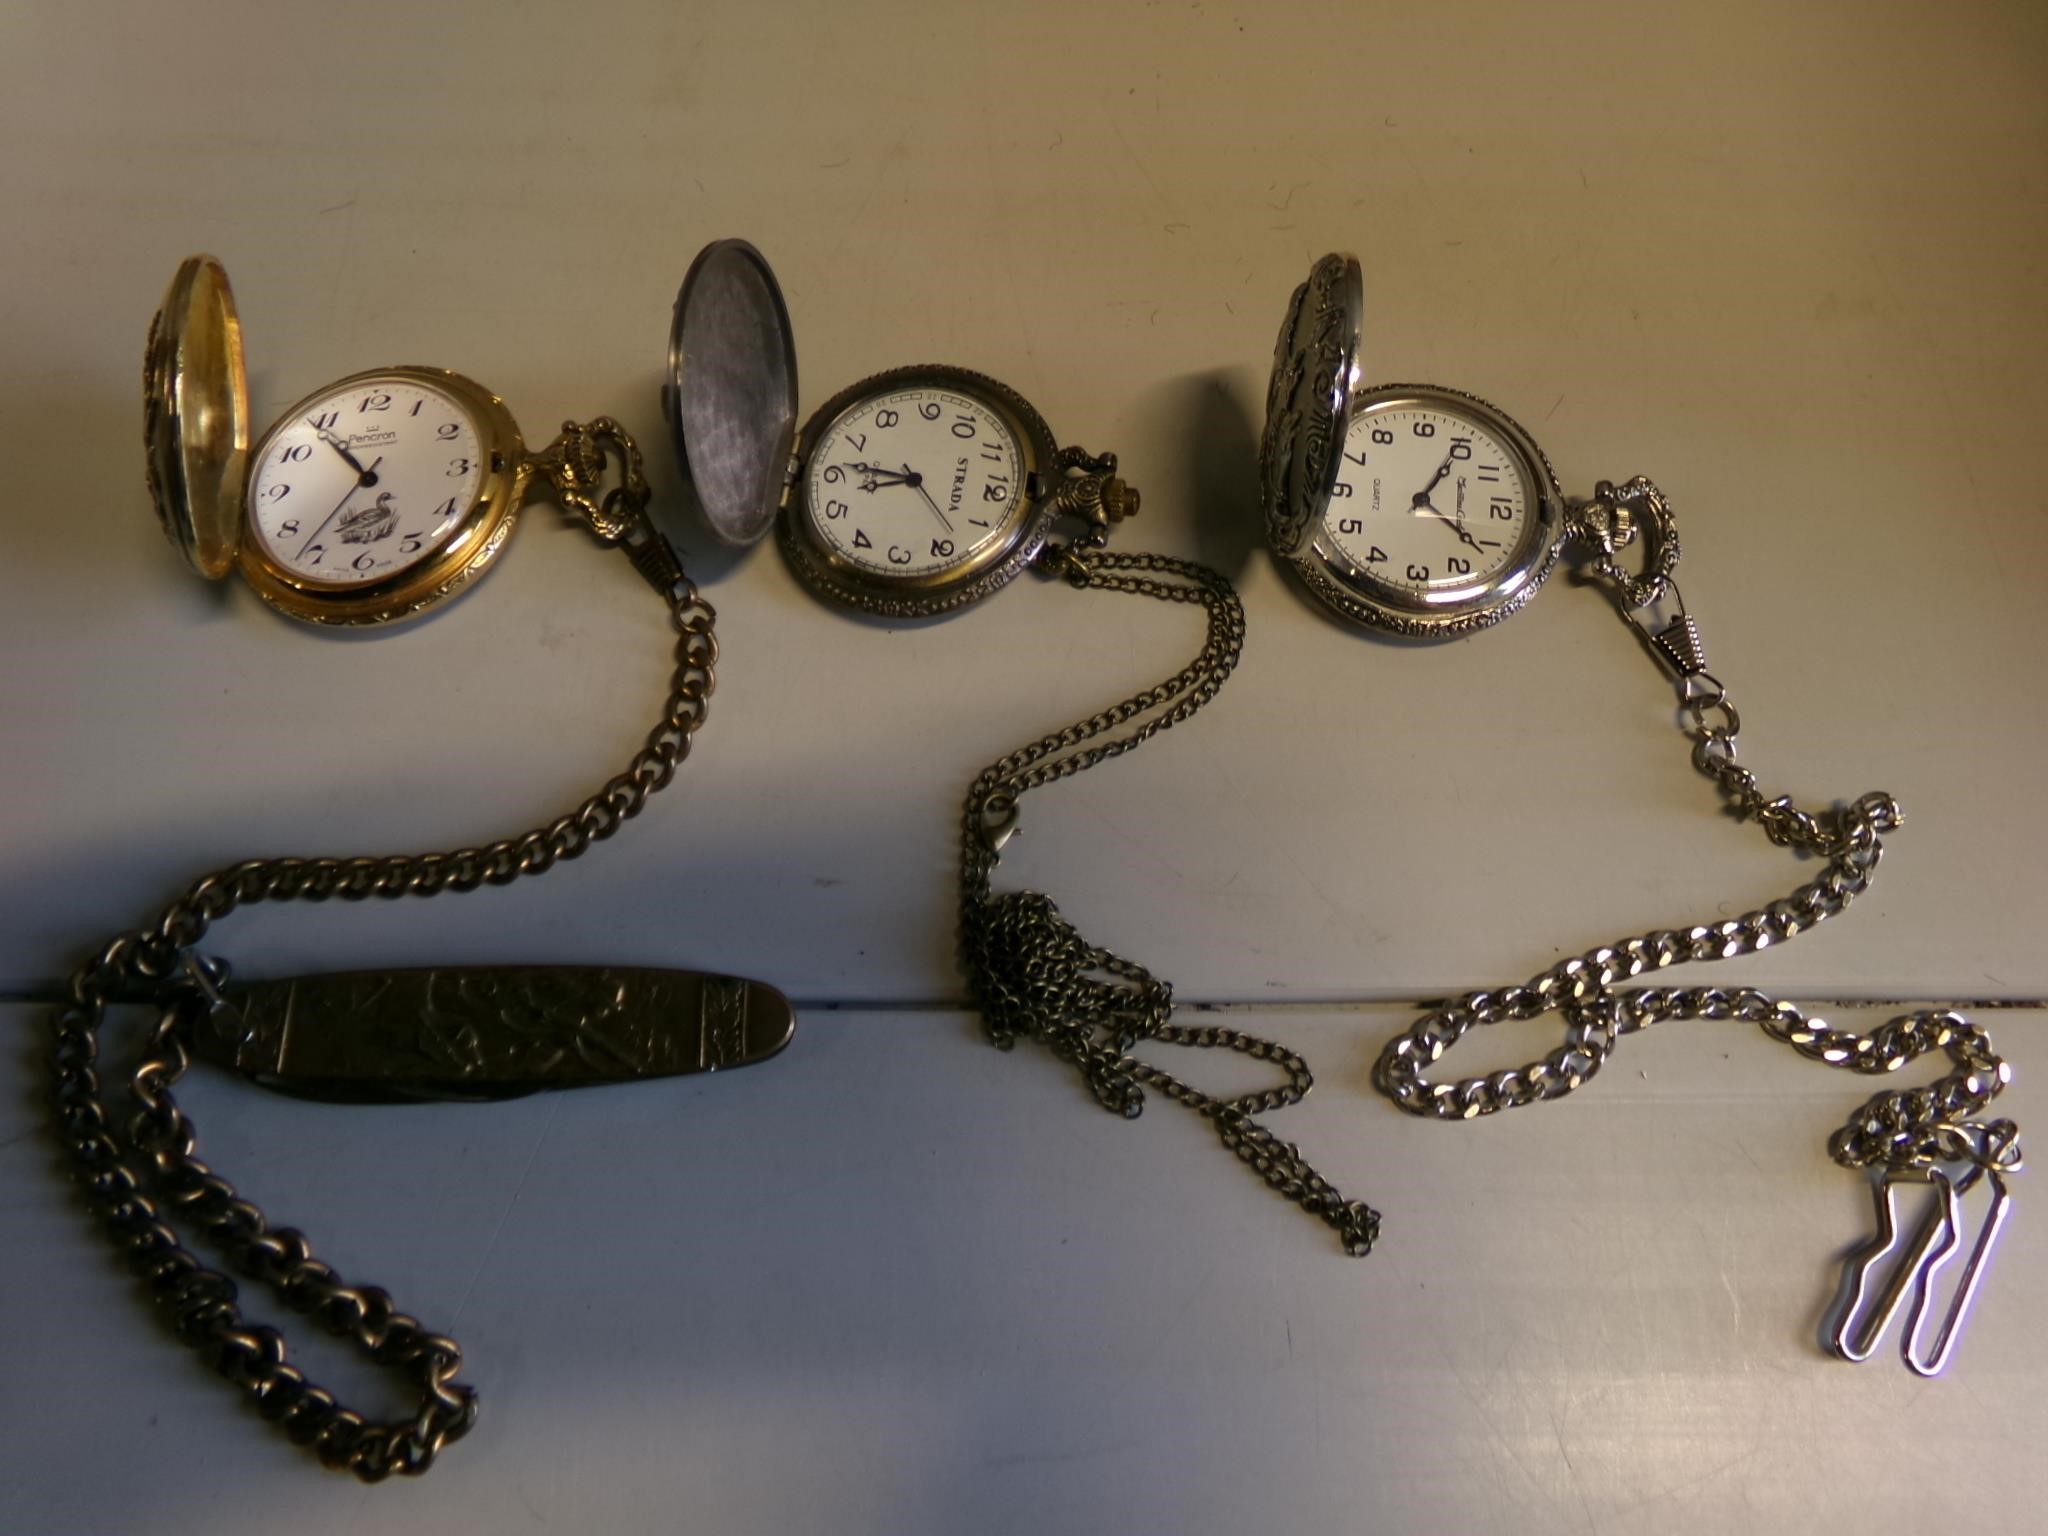 3 Pocket watches and 1 knife